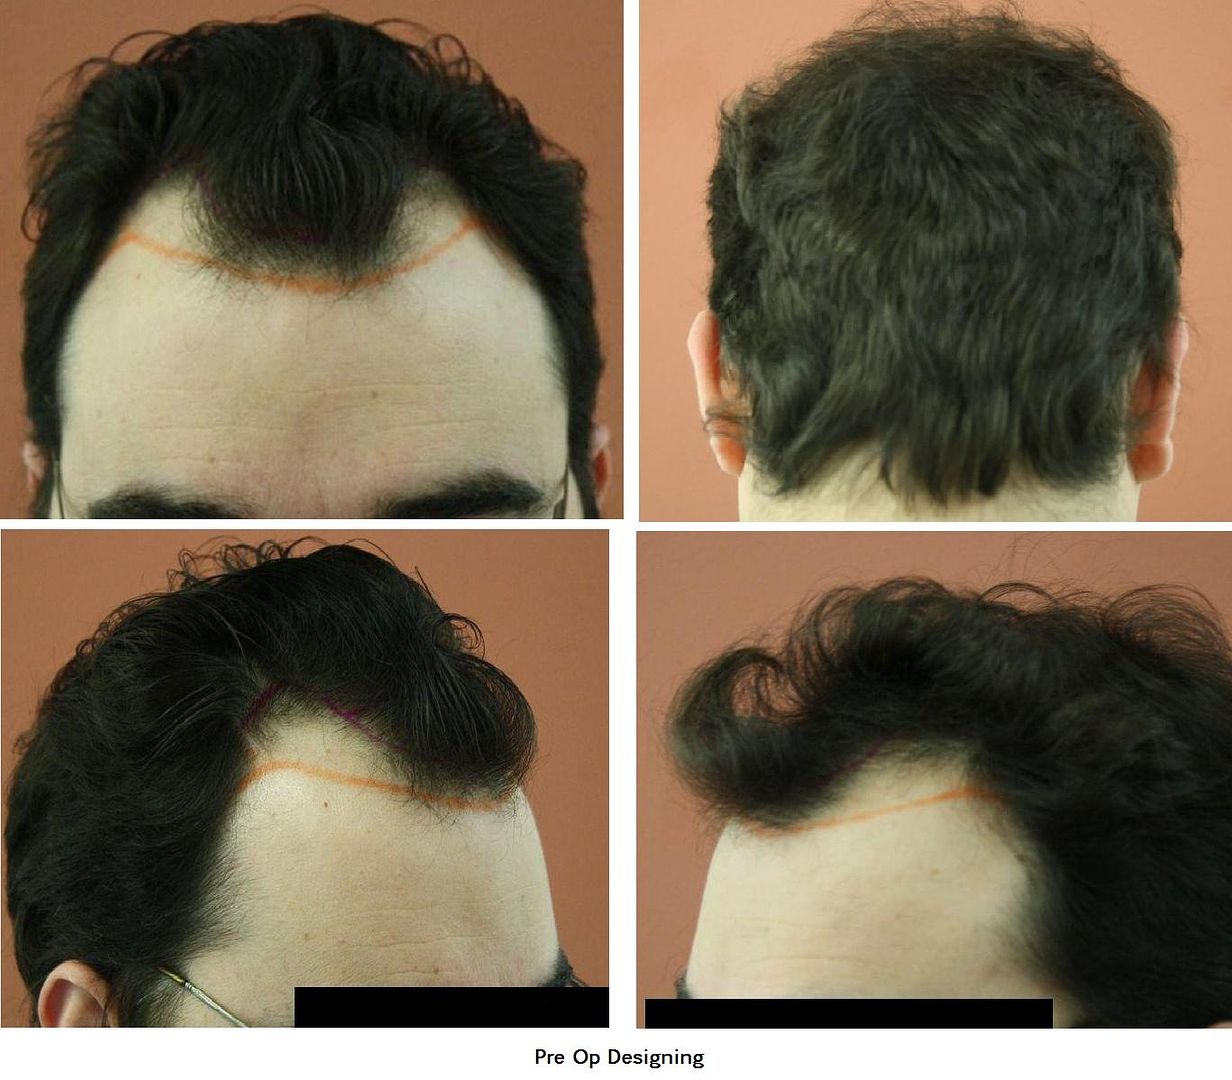 http://i156.photobucket.com/albums/t23/BHRClinic/2516%20%20%20FUE/PreOpDesigning.jpg